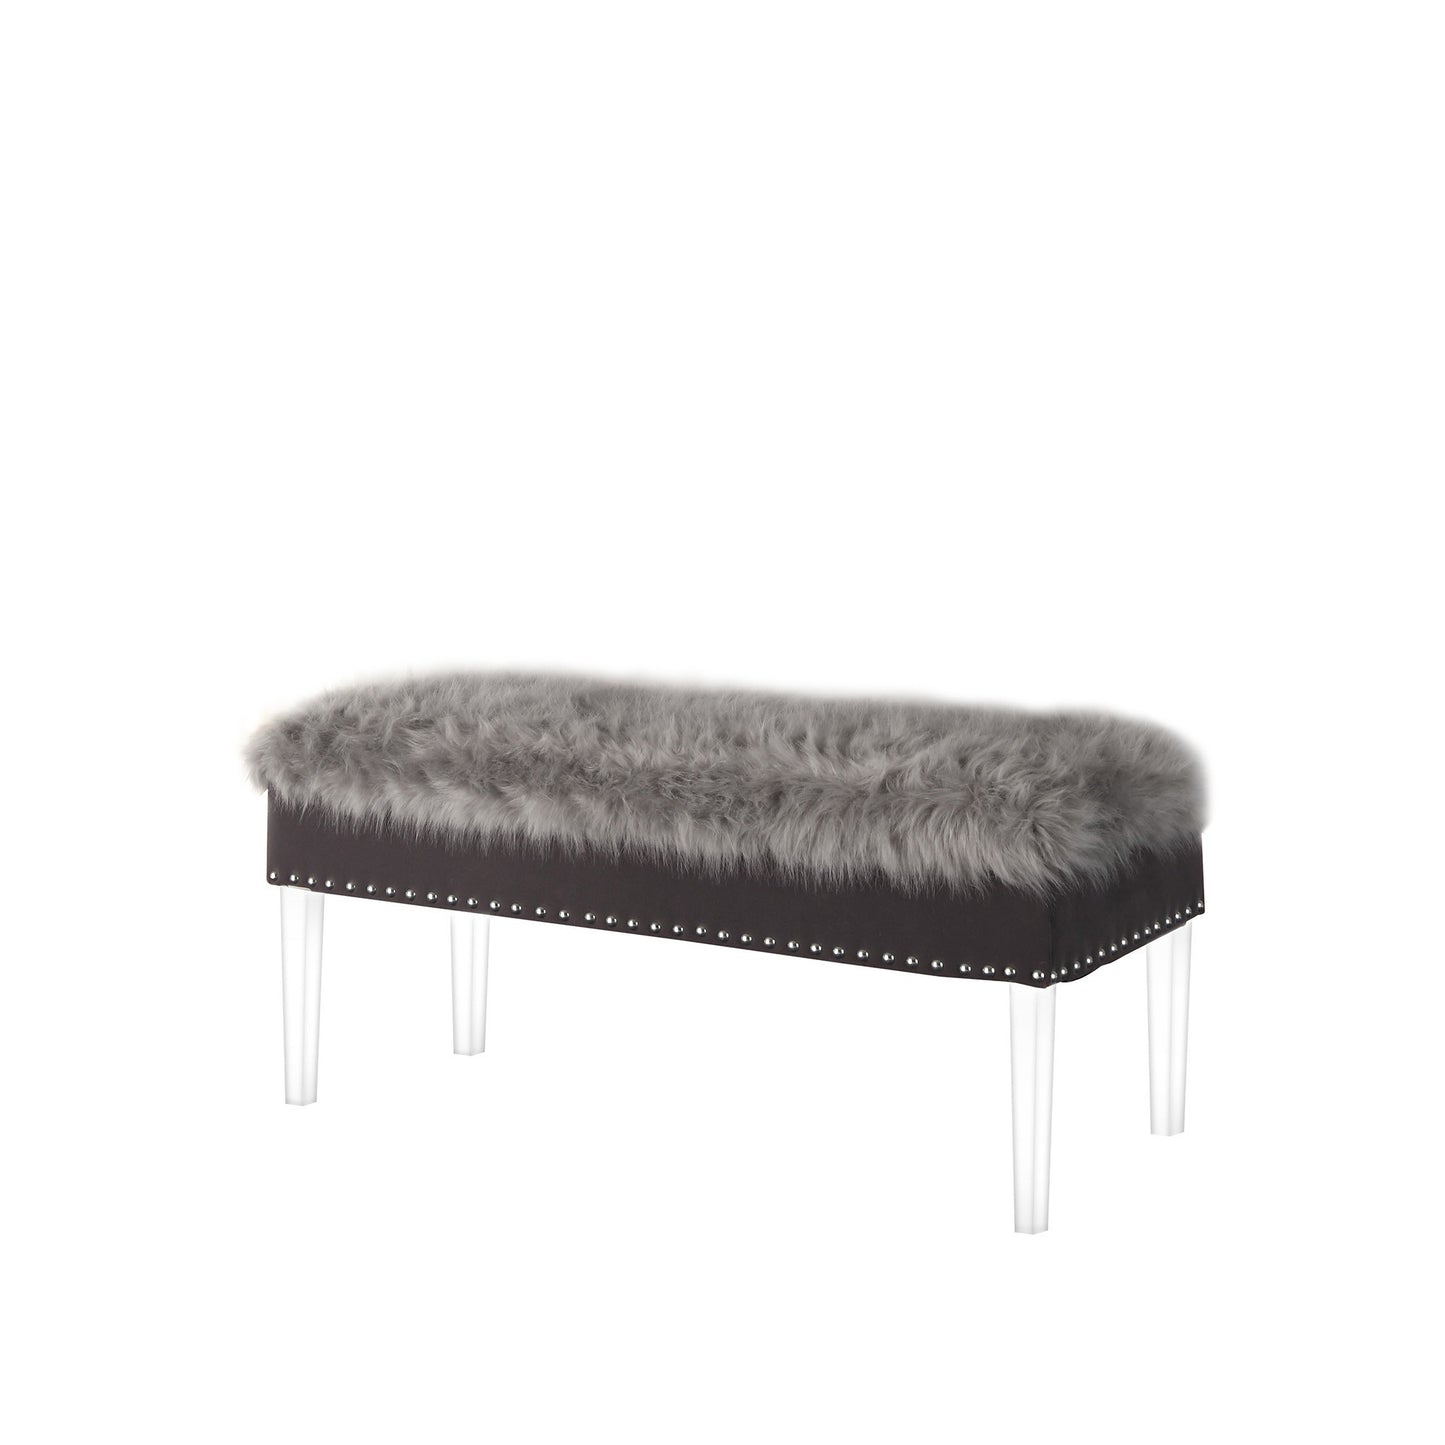 42" Gray and Clear Upholstered Faux Fur Bench with Flip top